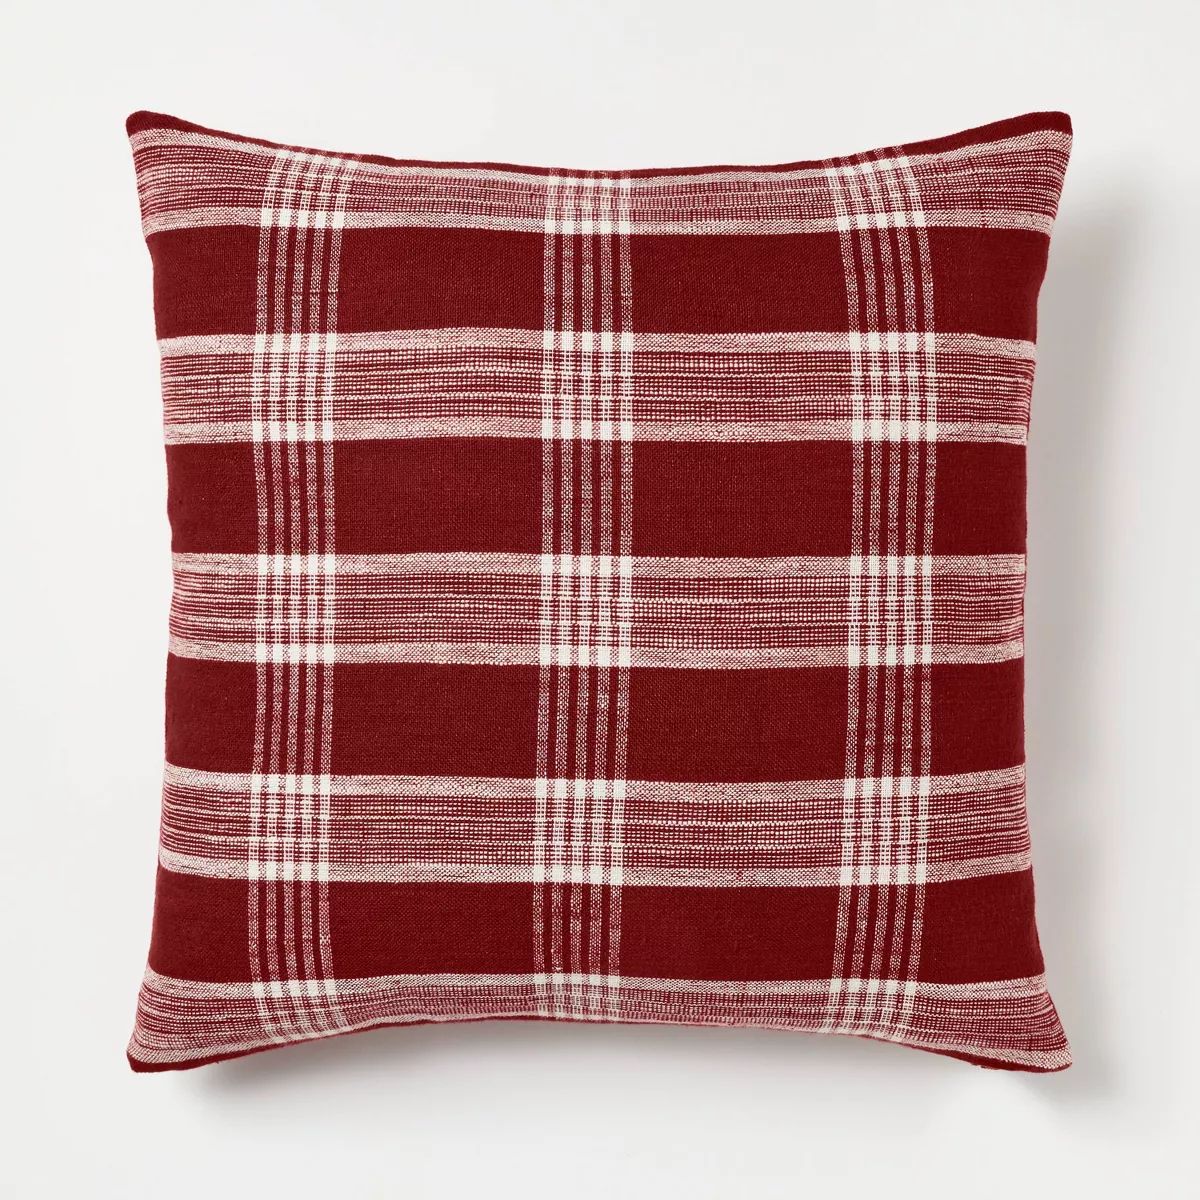 Woven Plaid Square Throw Pillow with Zipper Pull Red - Threshold™ designed with Studio McGee | Target